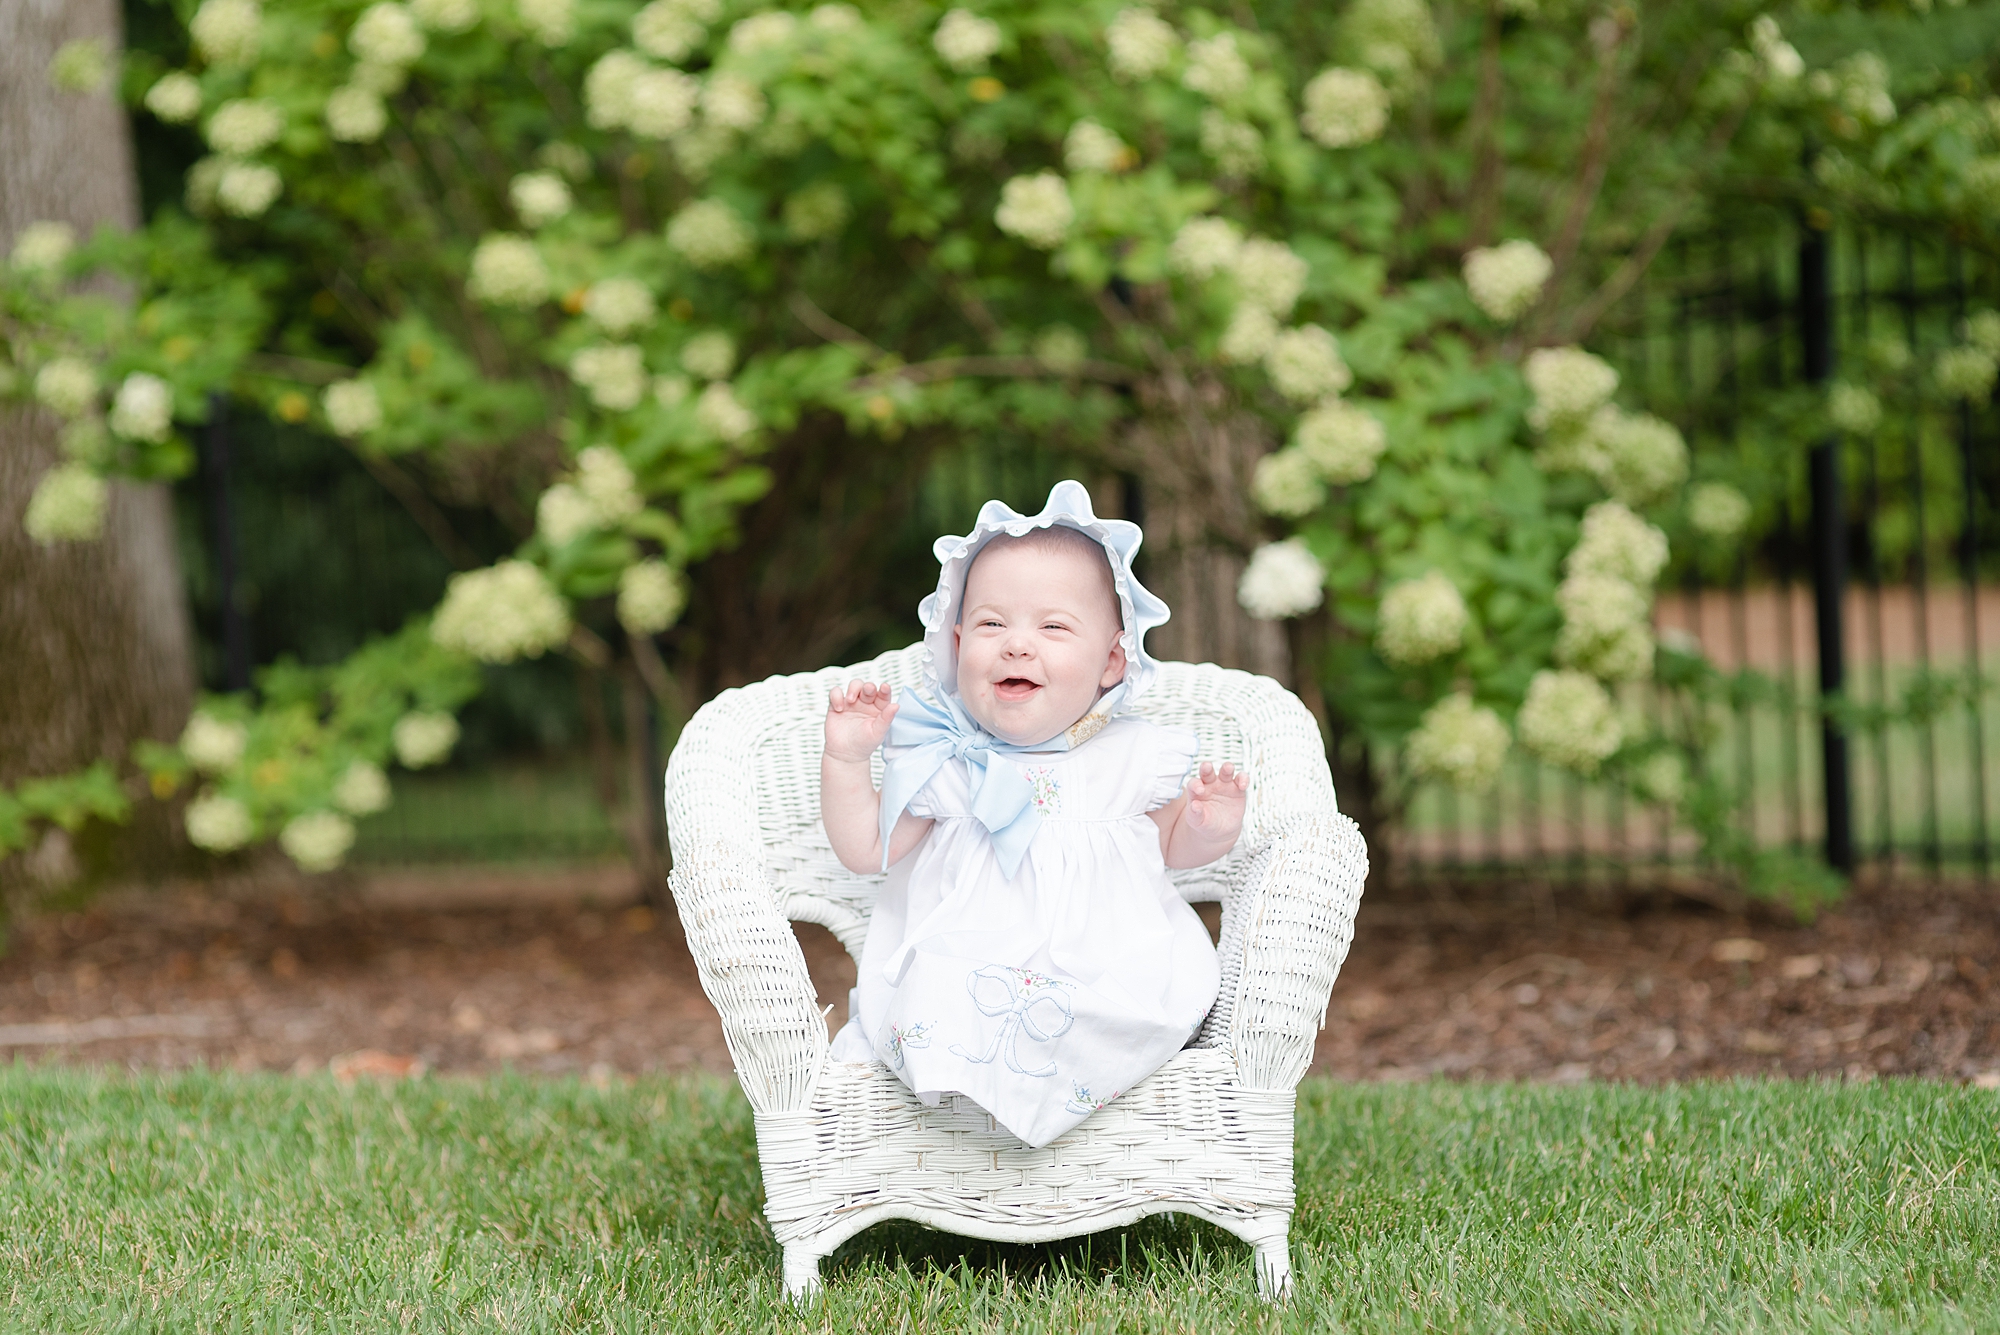 Baby girl wearing a blue bonnet is taking her 6 month portraits and is sitting on a white whicker chair against a floral backdrop in her grandparents backyard